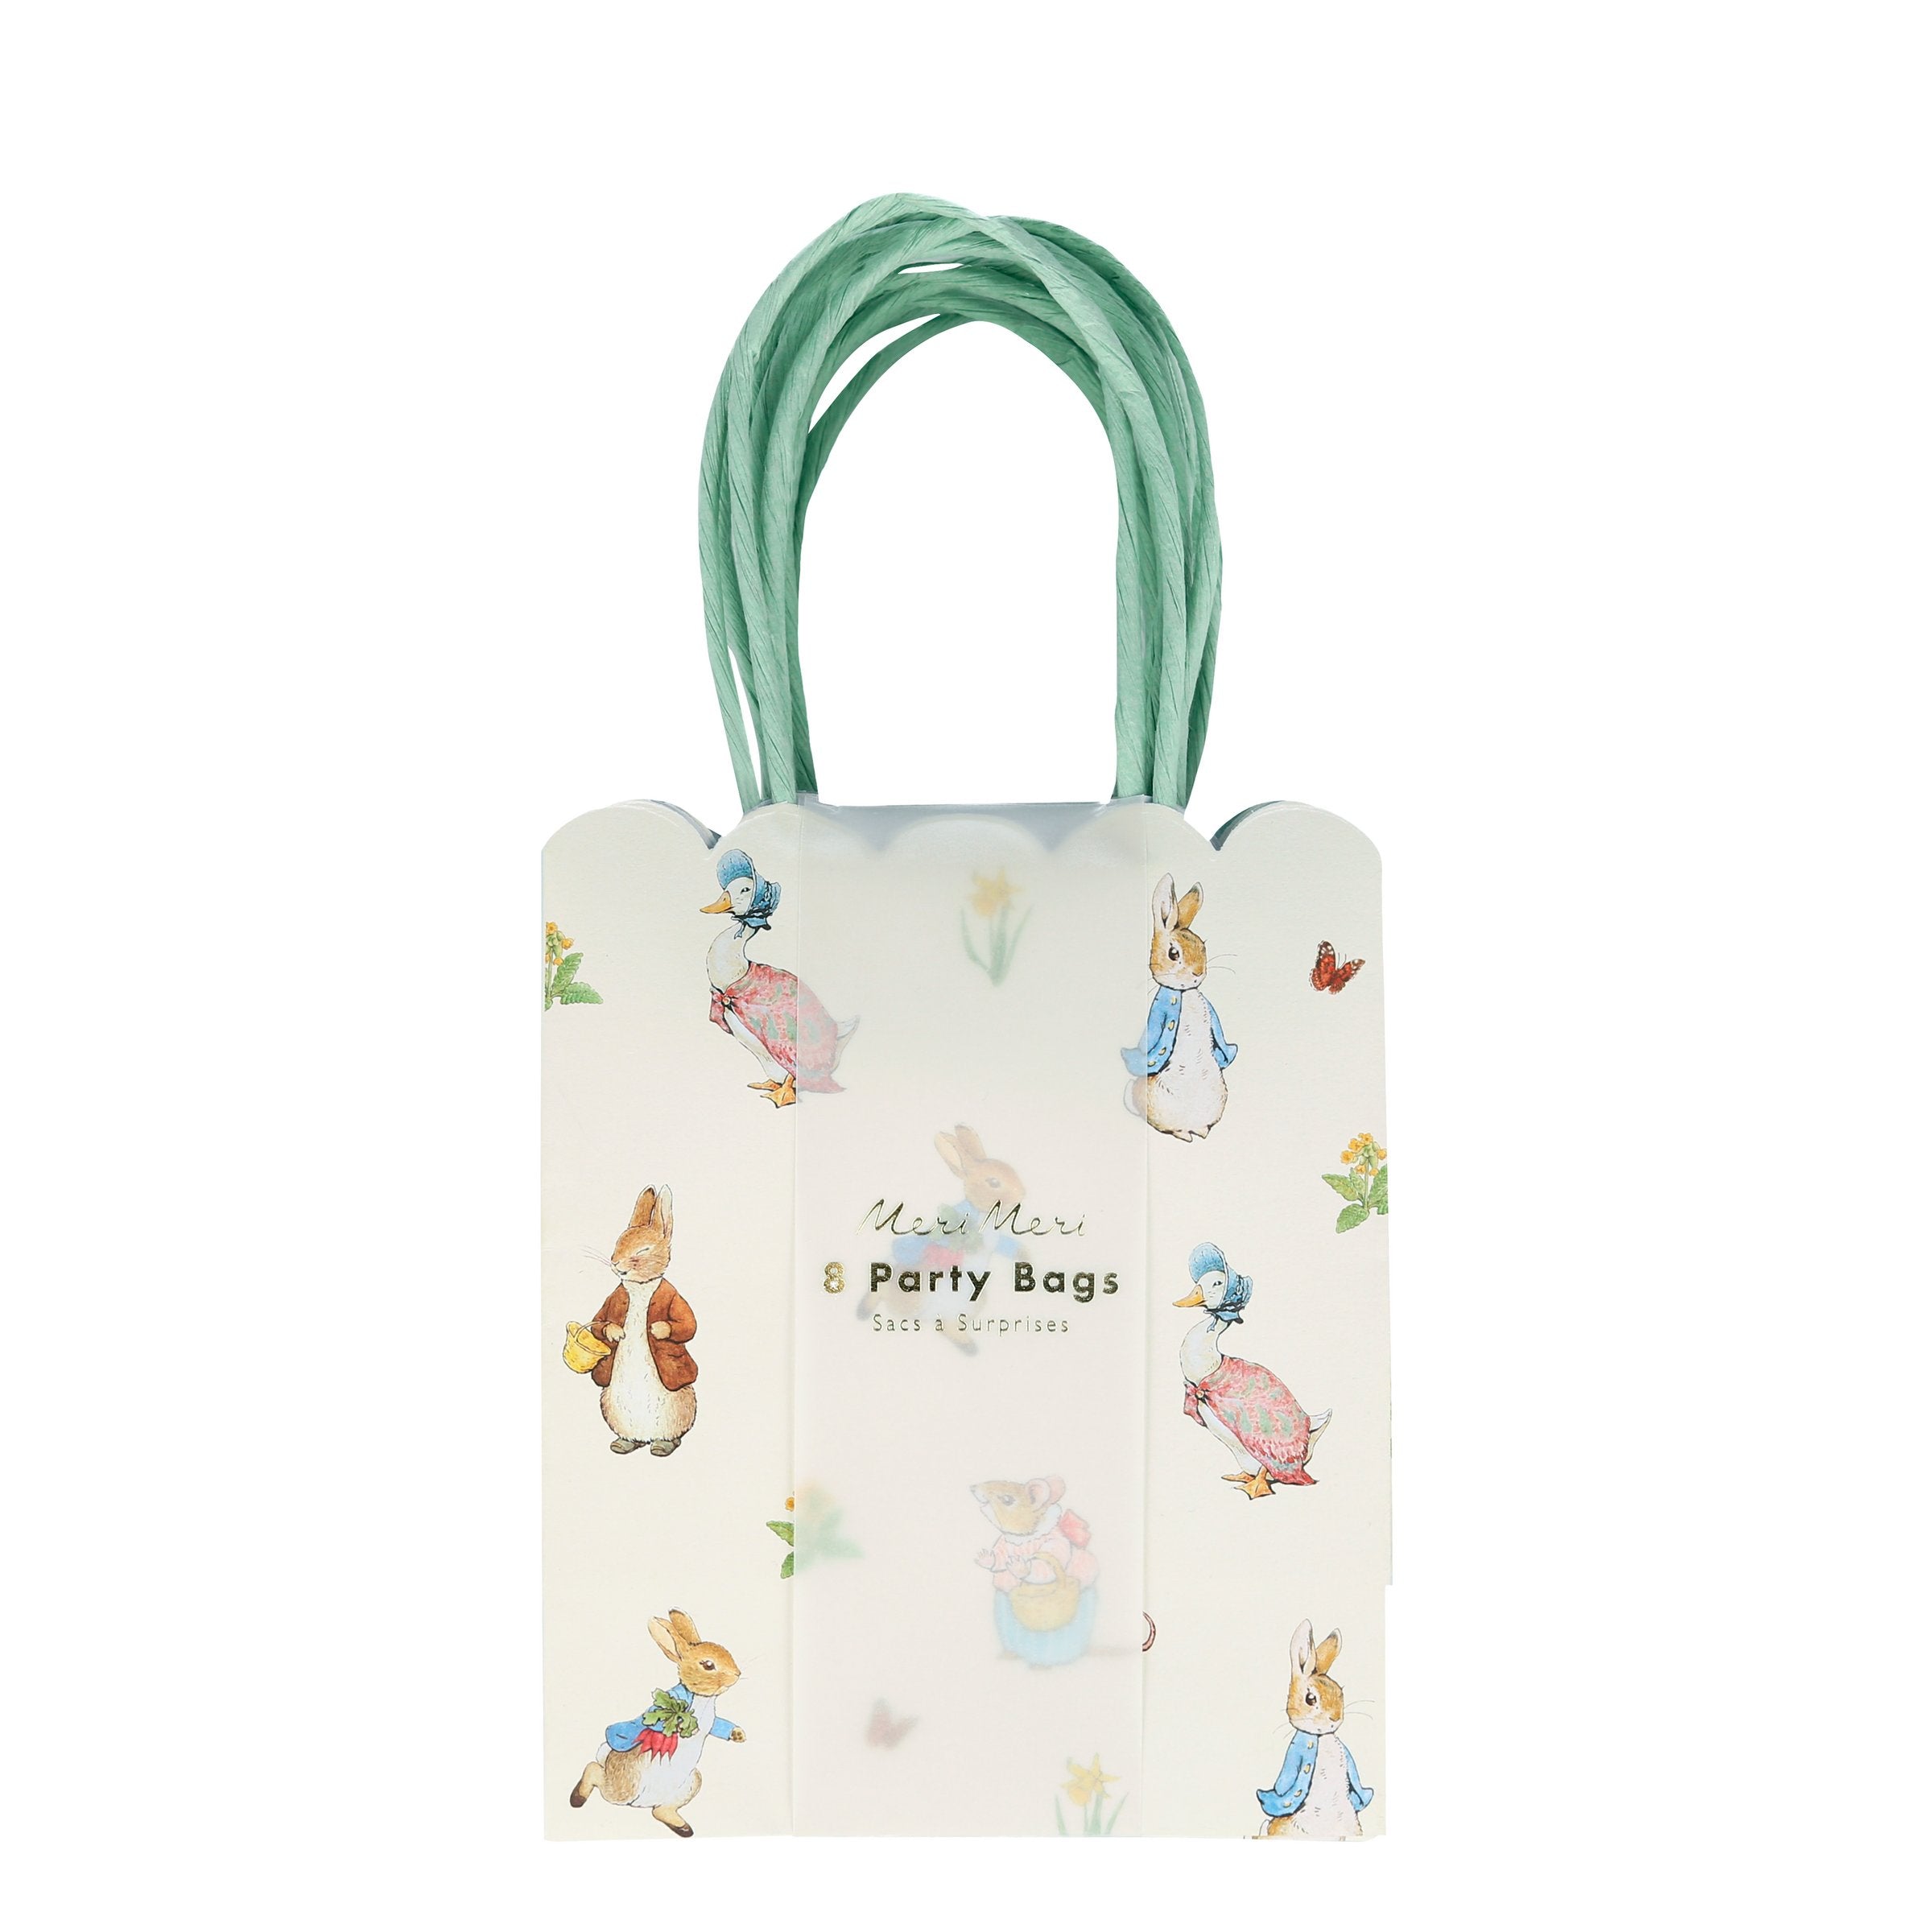 These party bags feature charming Peter Rabbit characters, scallop edges and paper handles.